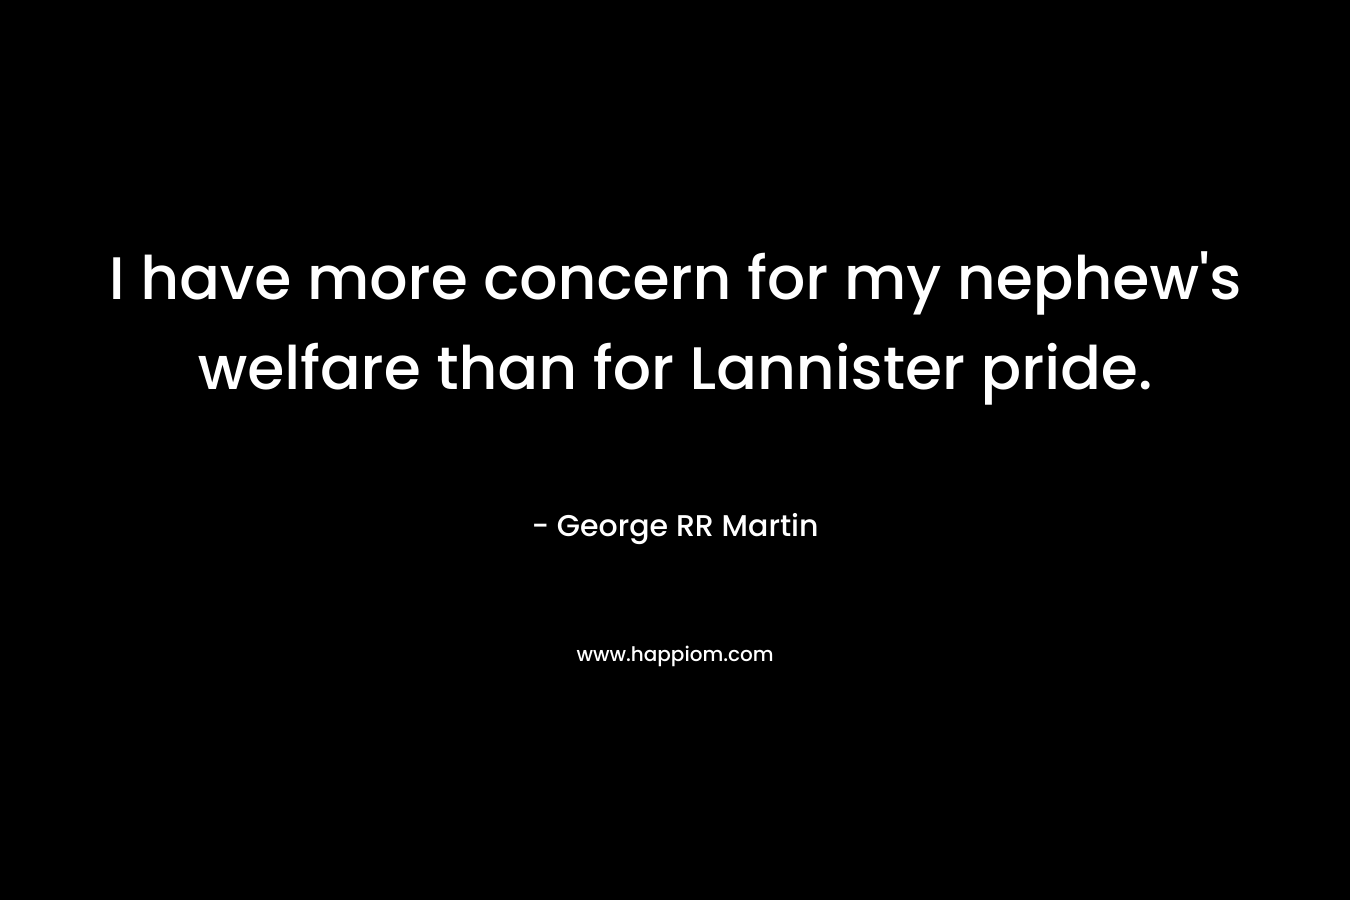 I have more concern for my nephew’s welfare than for Lannister pride. – George RR Martin